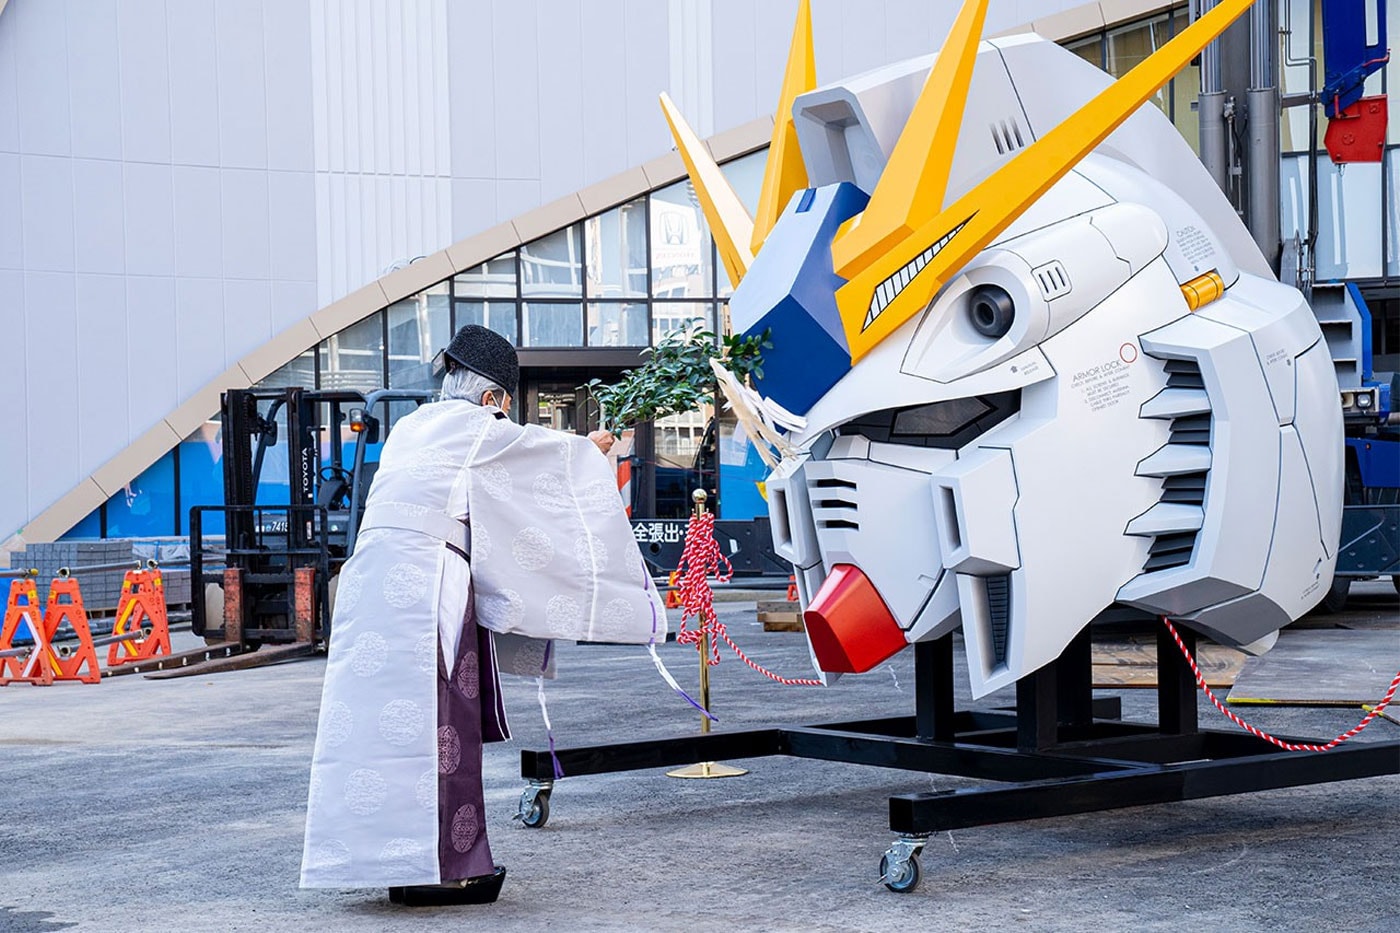 Japan's Newest Life-Sized Gundam Statue Is on Track for Completion RX-93FF V fukuoka anime kyushu